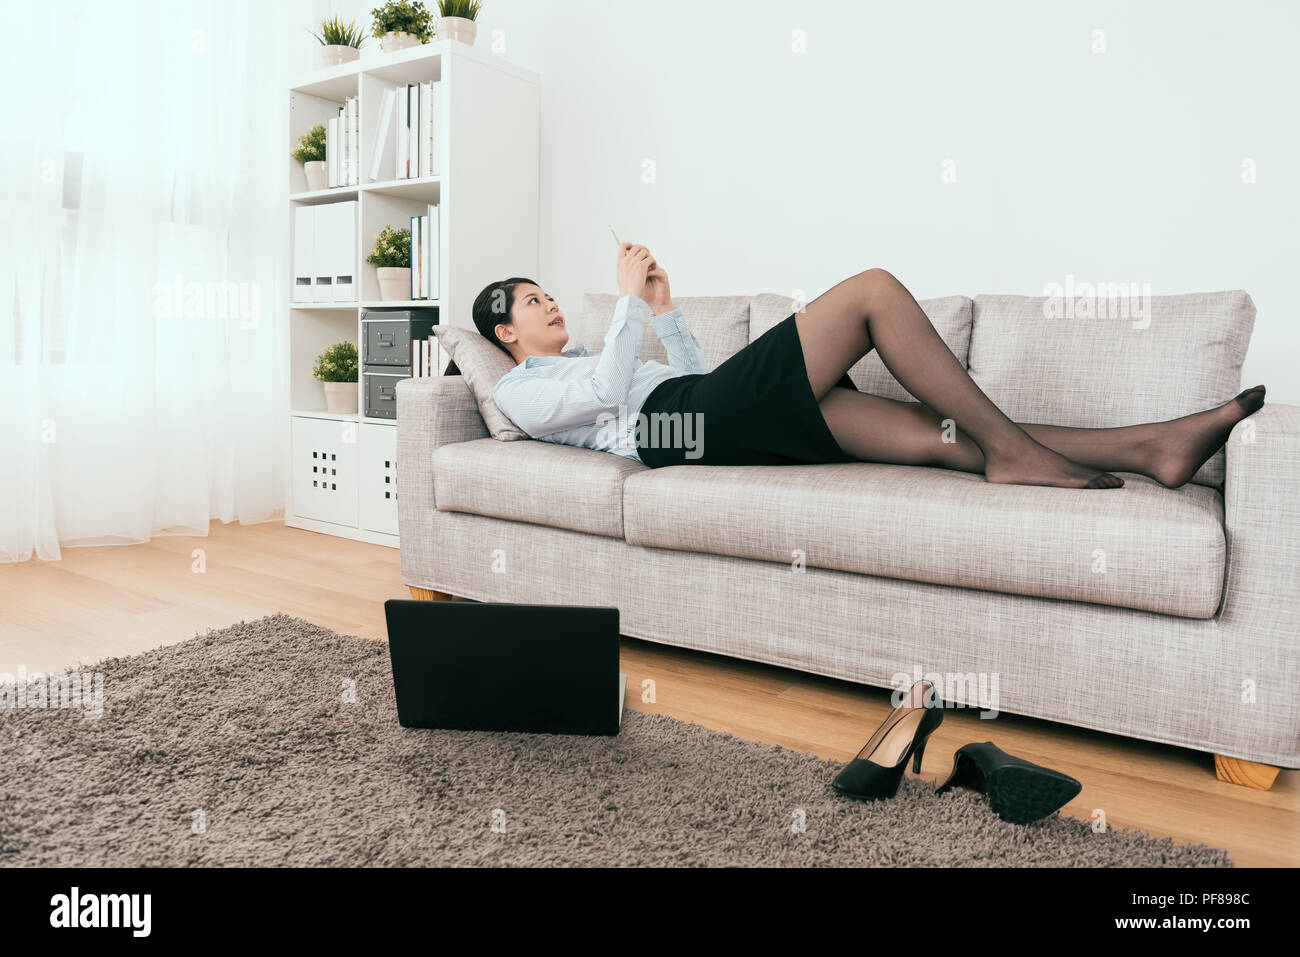 she is playing on her smartphone and also working at home by using notebook online at the same time lying down on cozy sofa Stock Photo